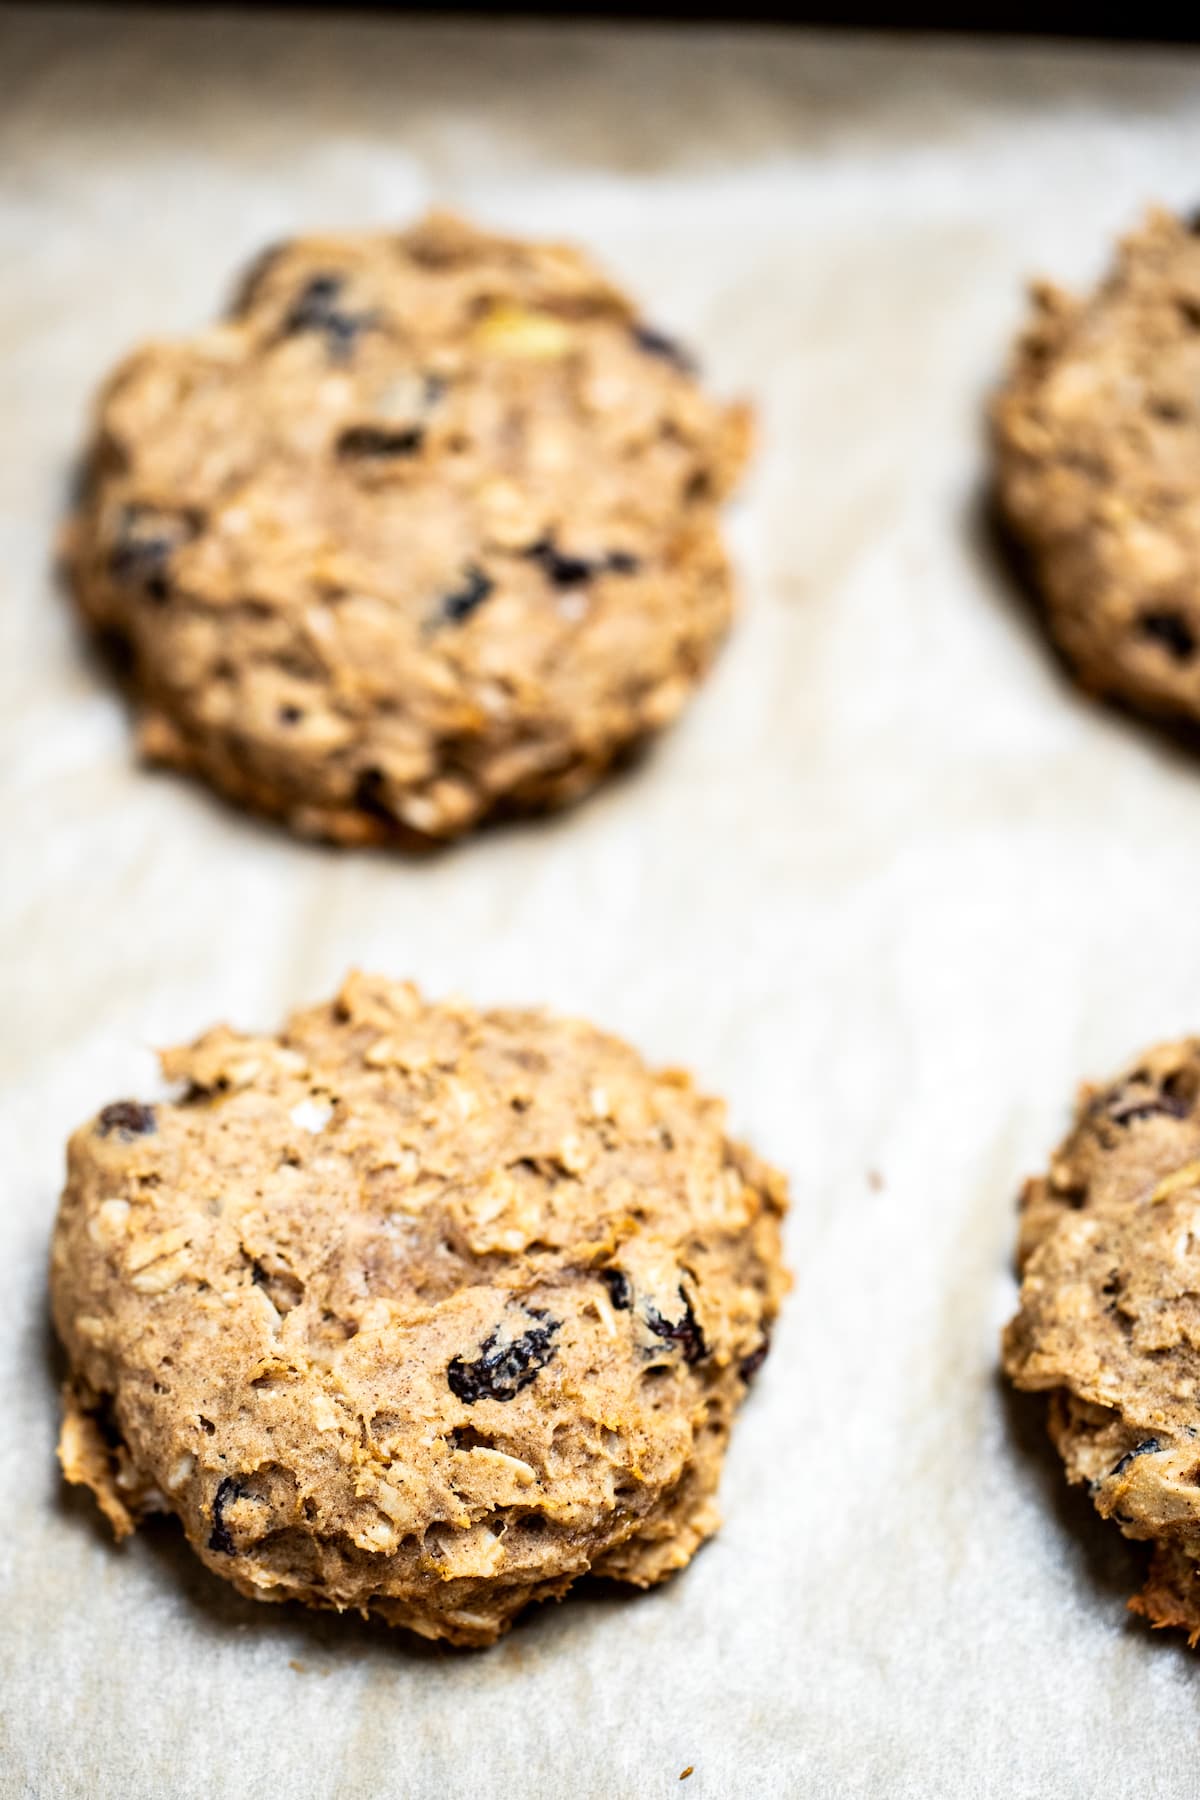 Oatmeal breakfast cookies sitting on a sheet pan with parchment paper.